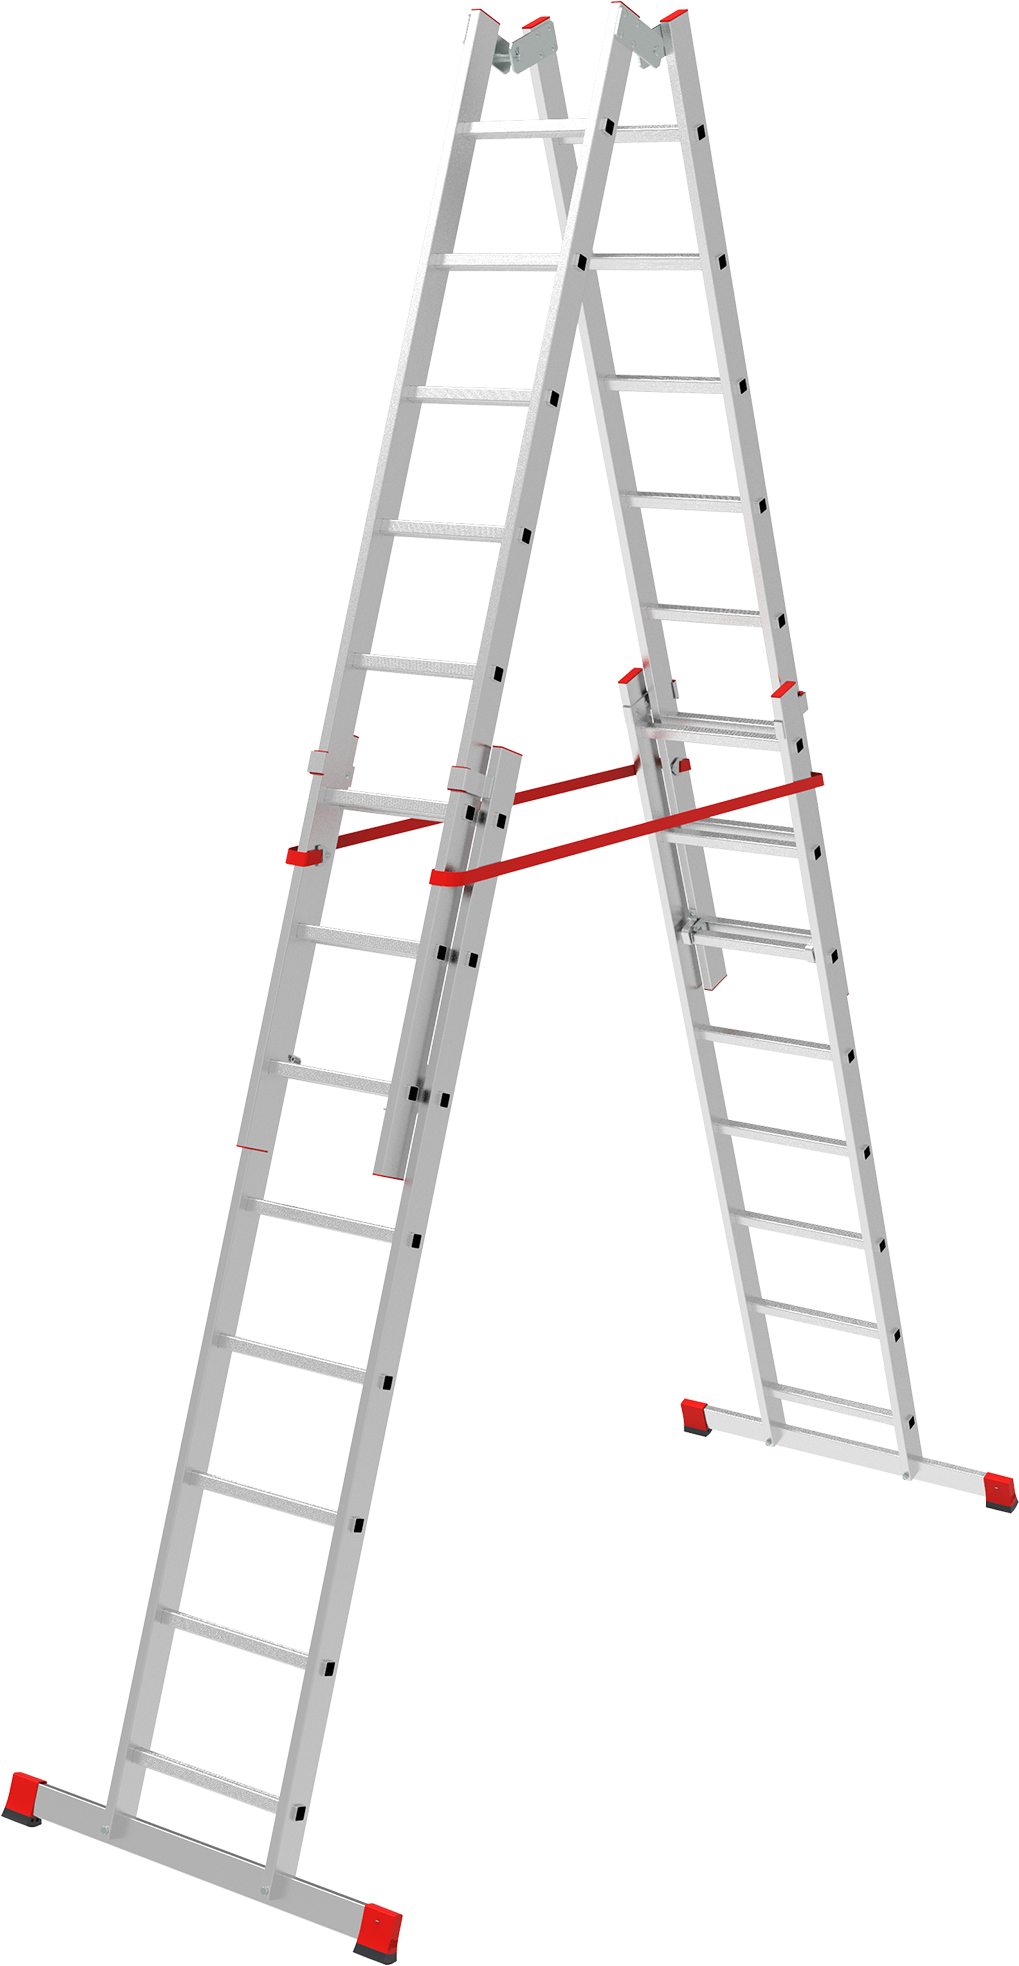 Aluminum industrial height adjustment rung ladder with flanged rungs NV5183